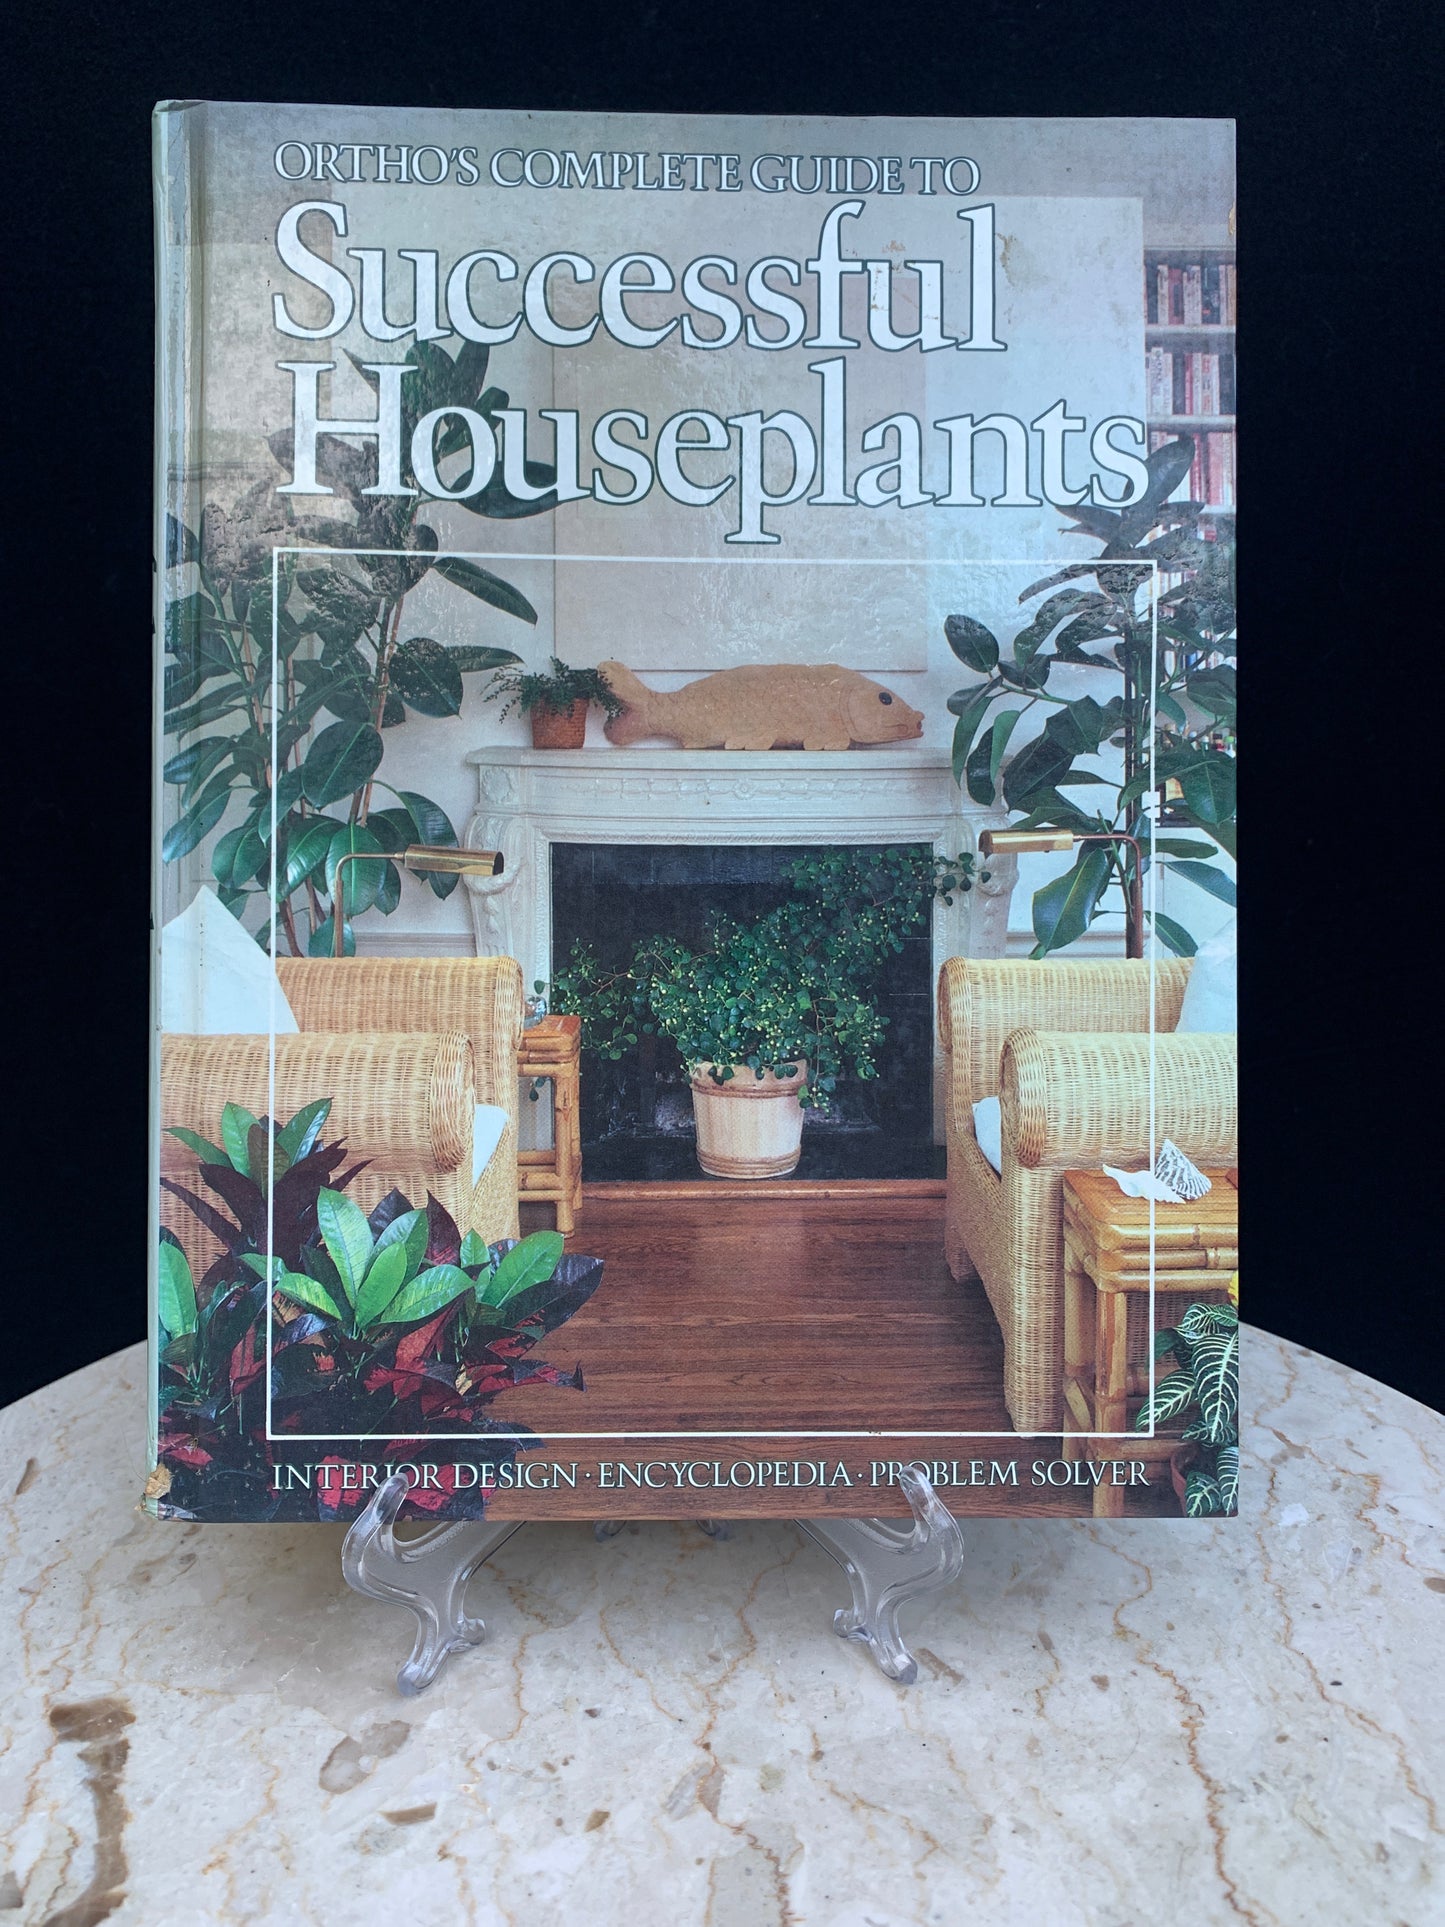 Successful Houseplants Home Gardening Tips and Tricks Vintage Decorating Book